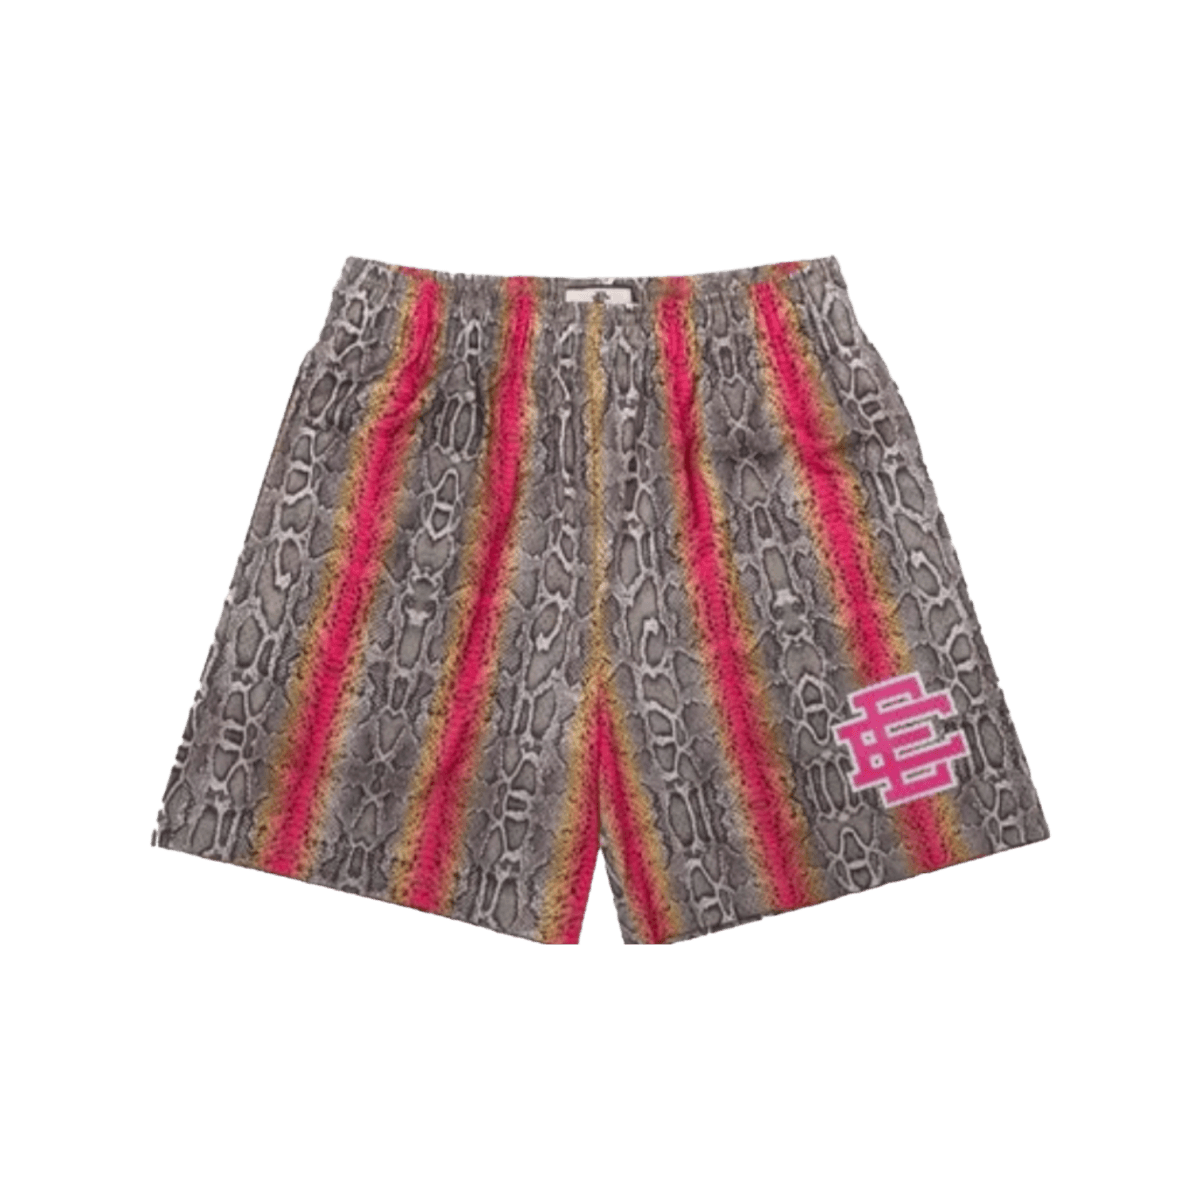 Eric Emanuel EE Shorts - Trout Brown - Shorts - Eric Emanuel - Jawns on Fire - sneakers